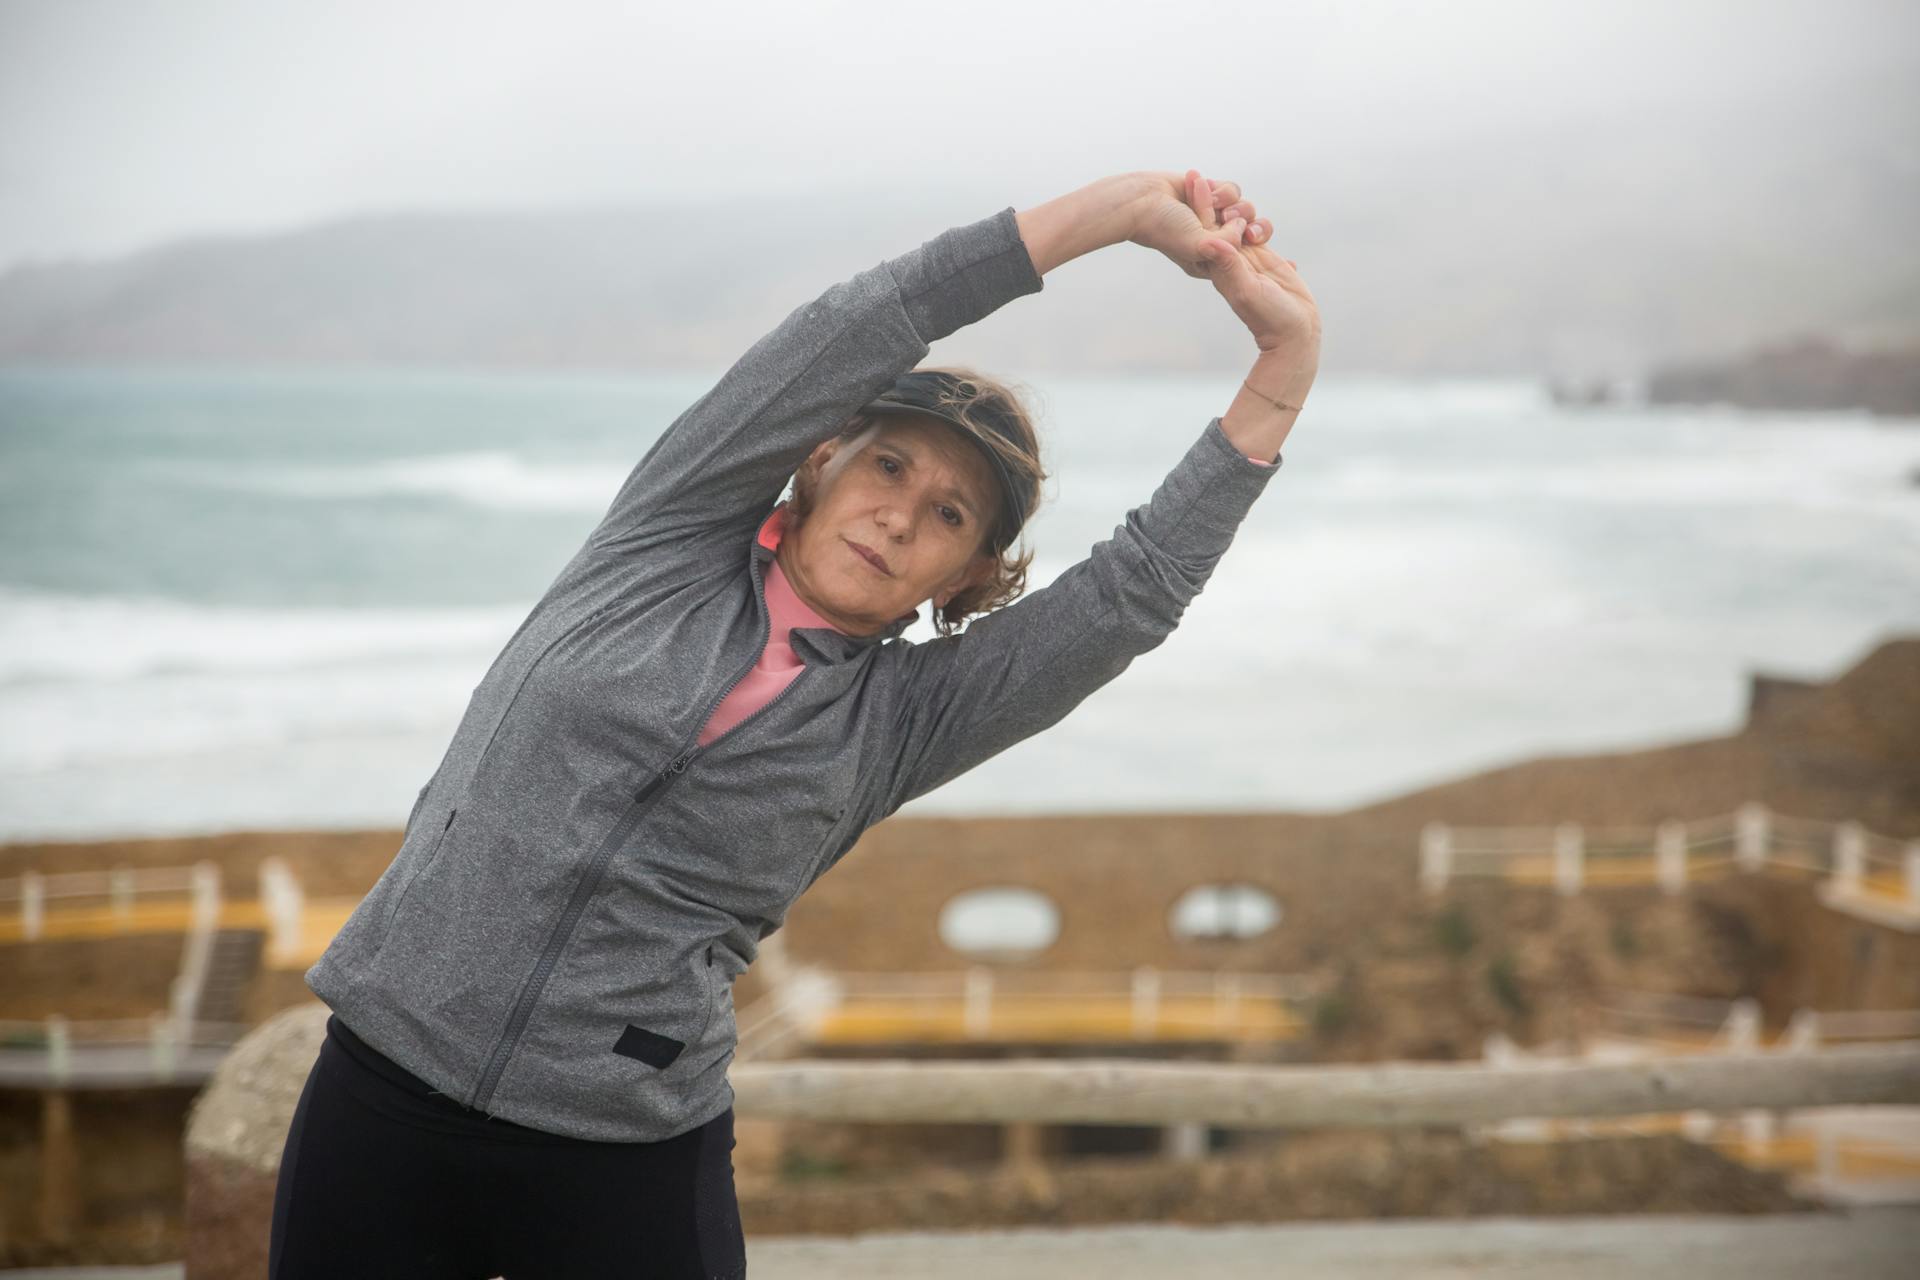 An older woman stretches before a run.